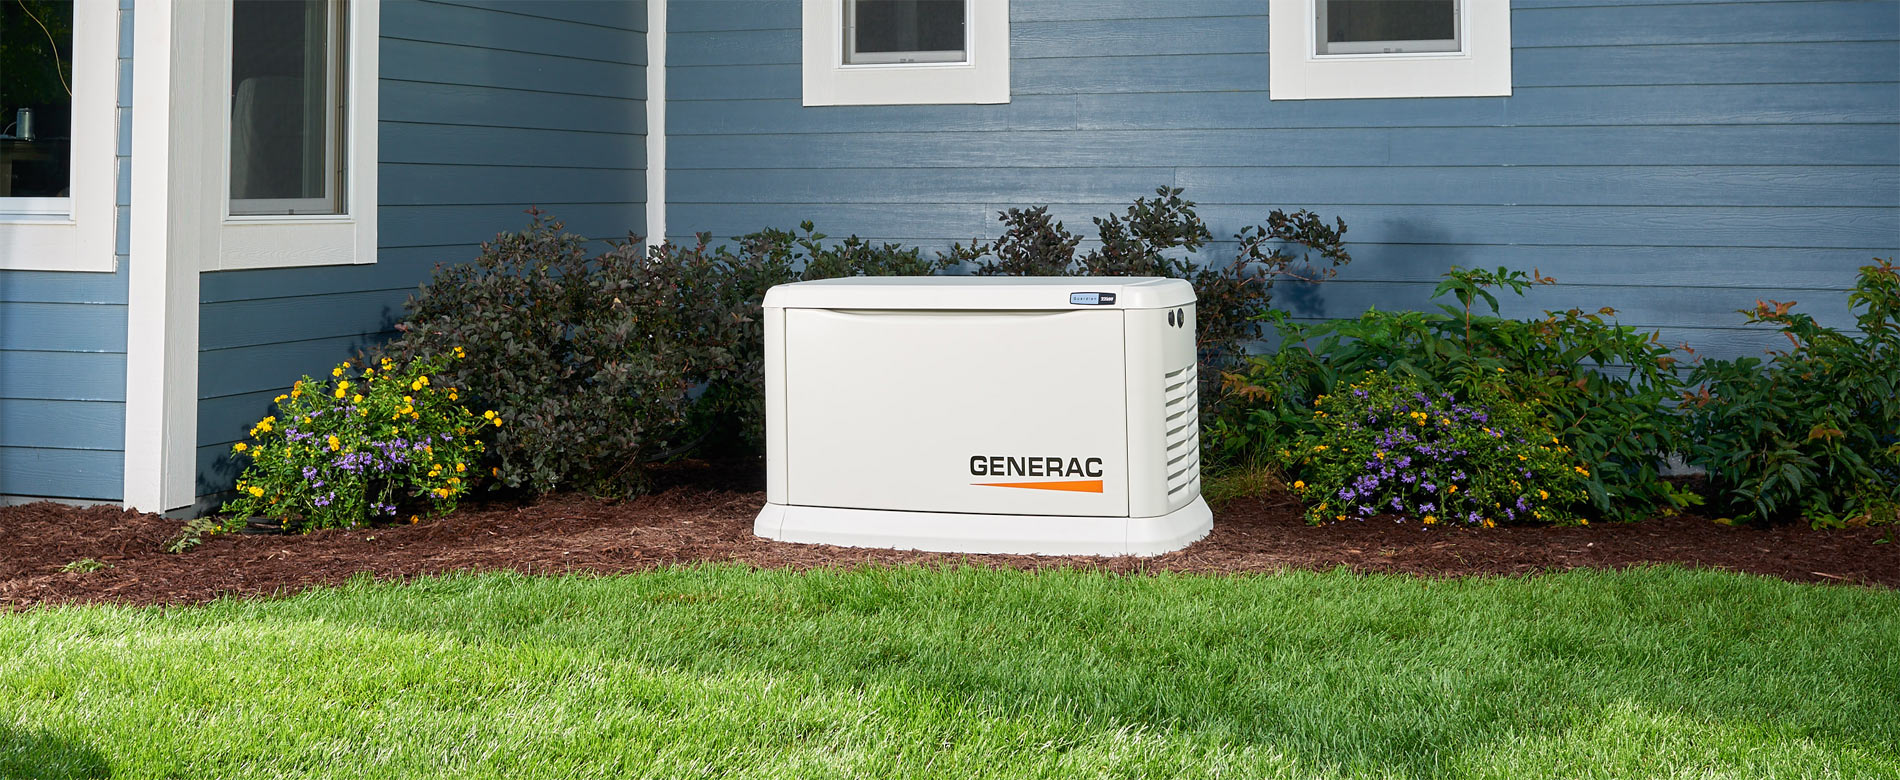 Ronaldson Electrical Construction | Residential Generators in Tabernacle NJ 08088